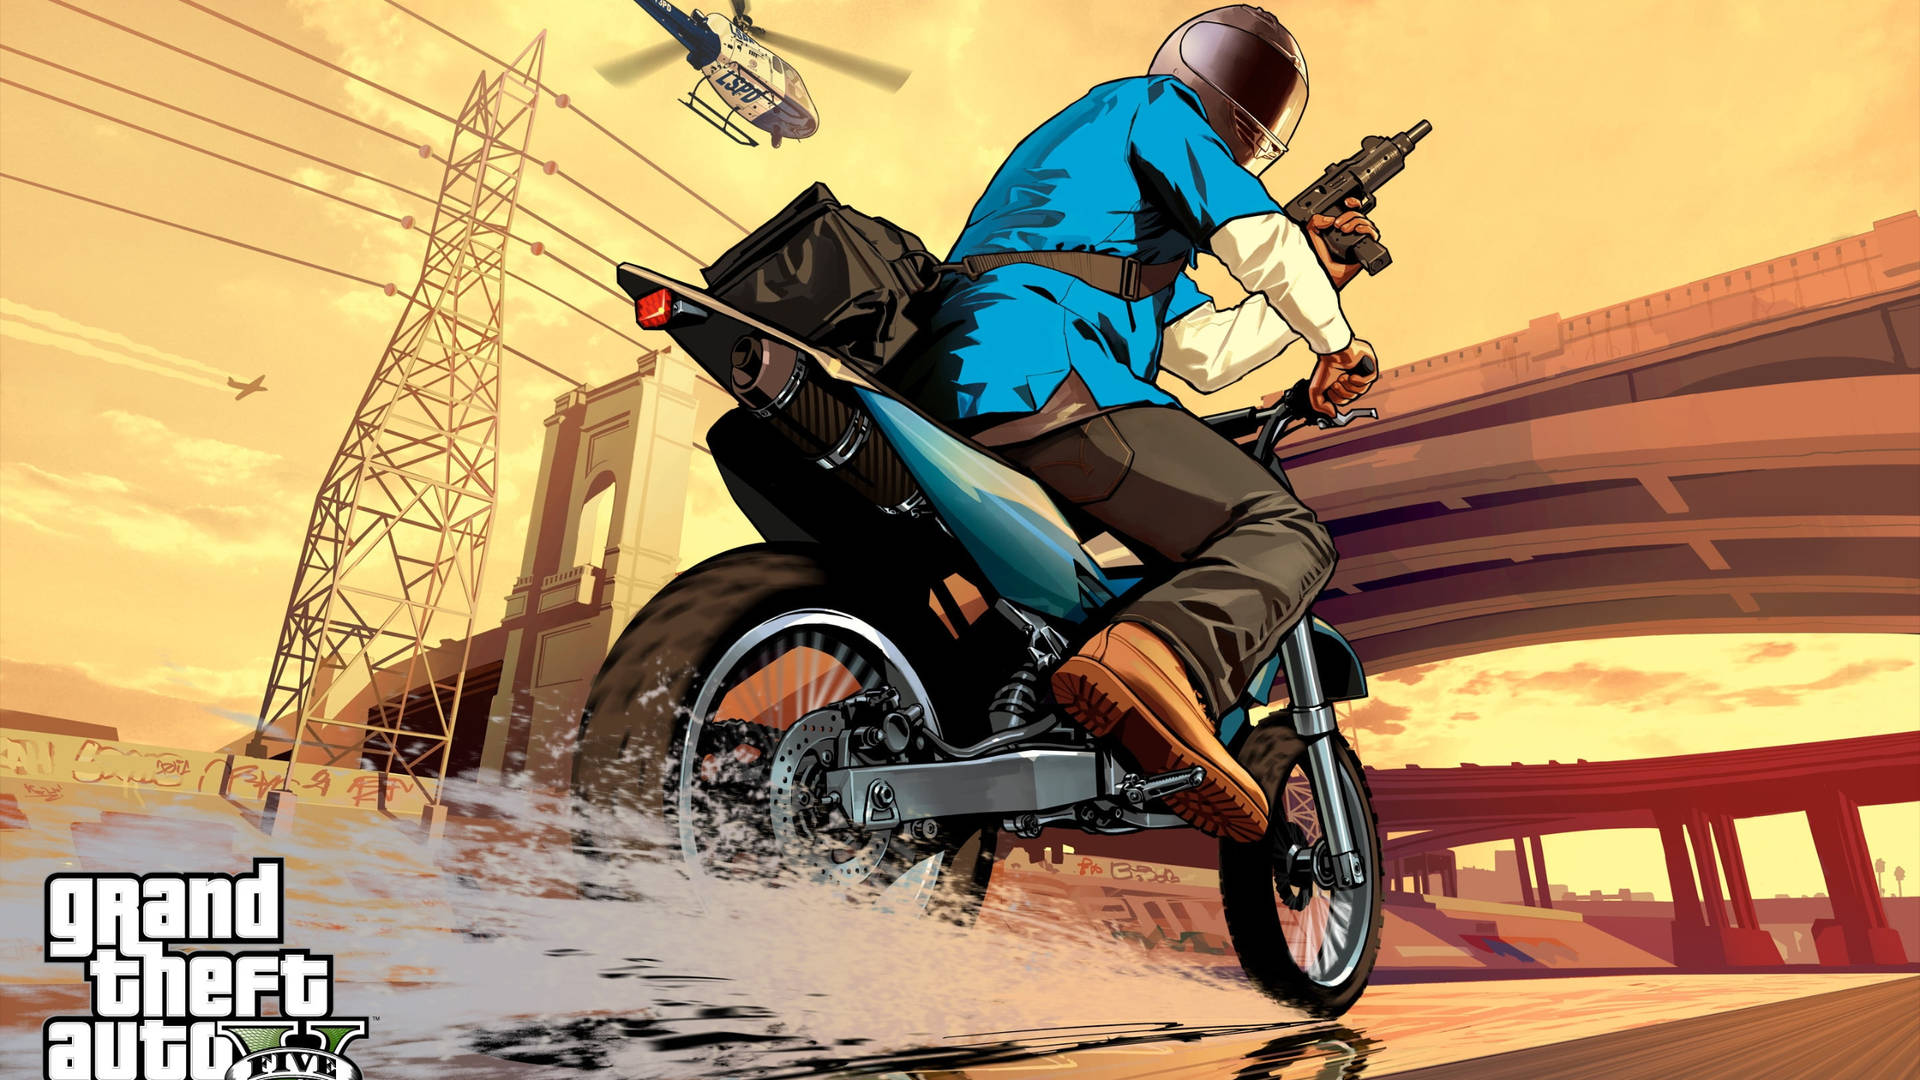 Grand Theft Auto Man Riding Motorcycle Background